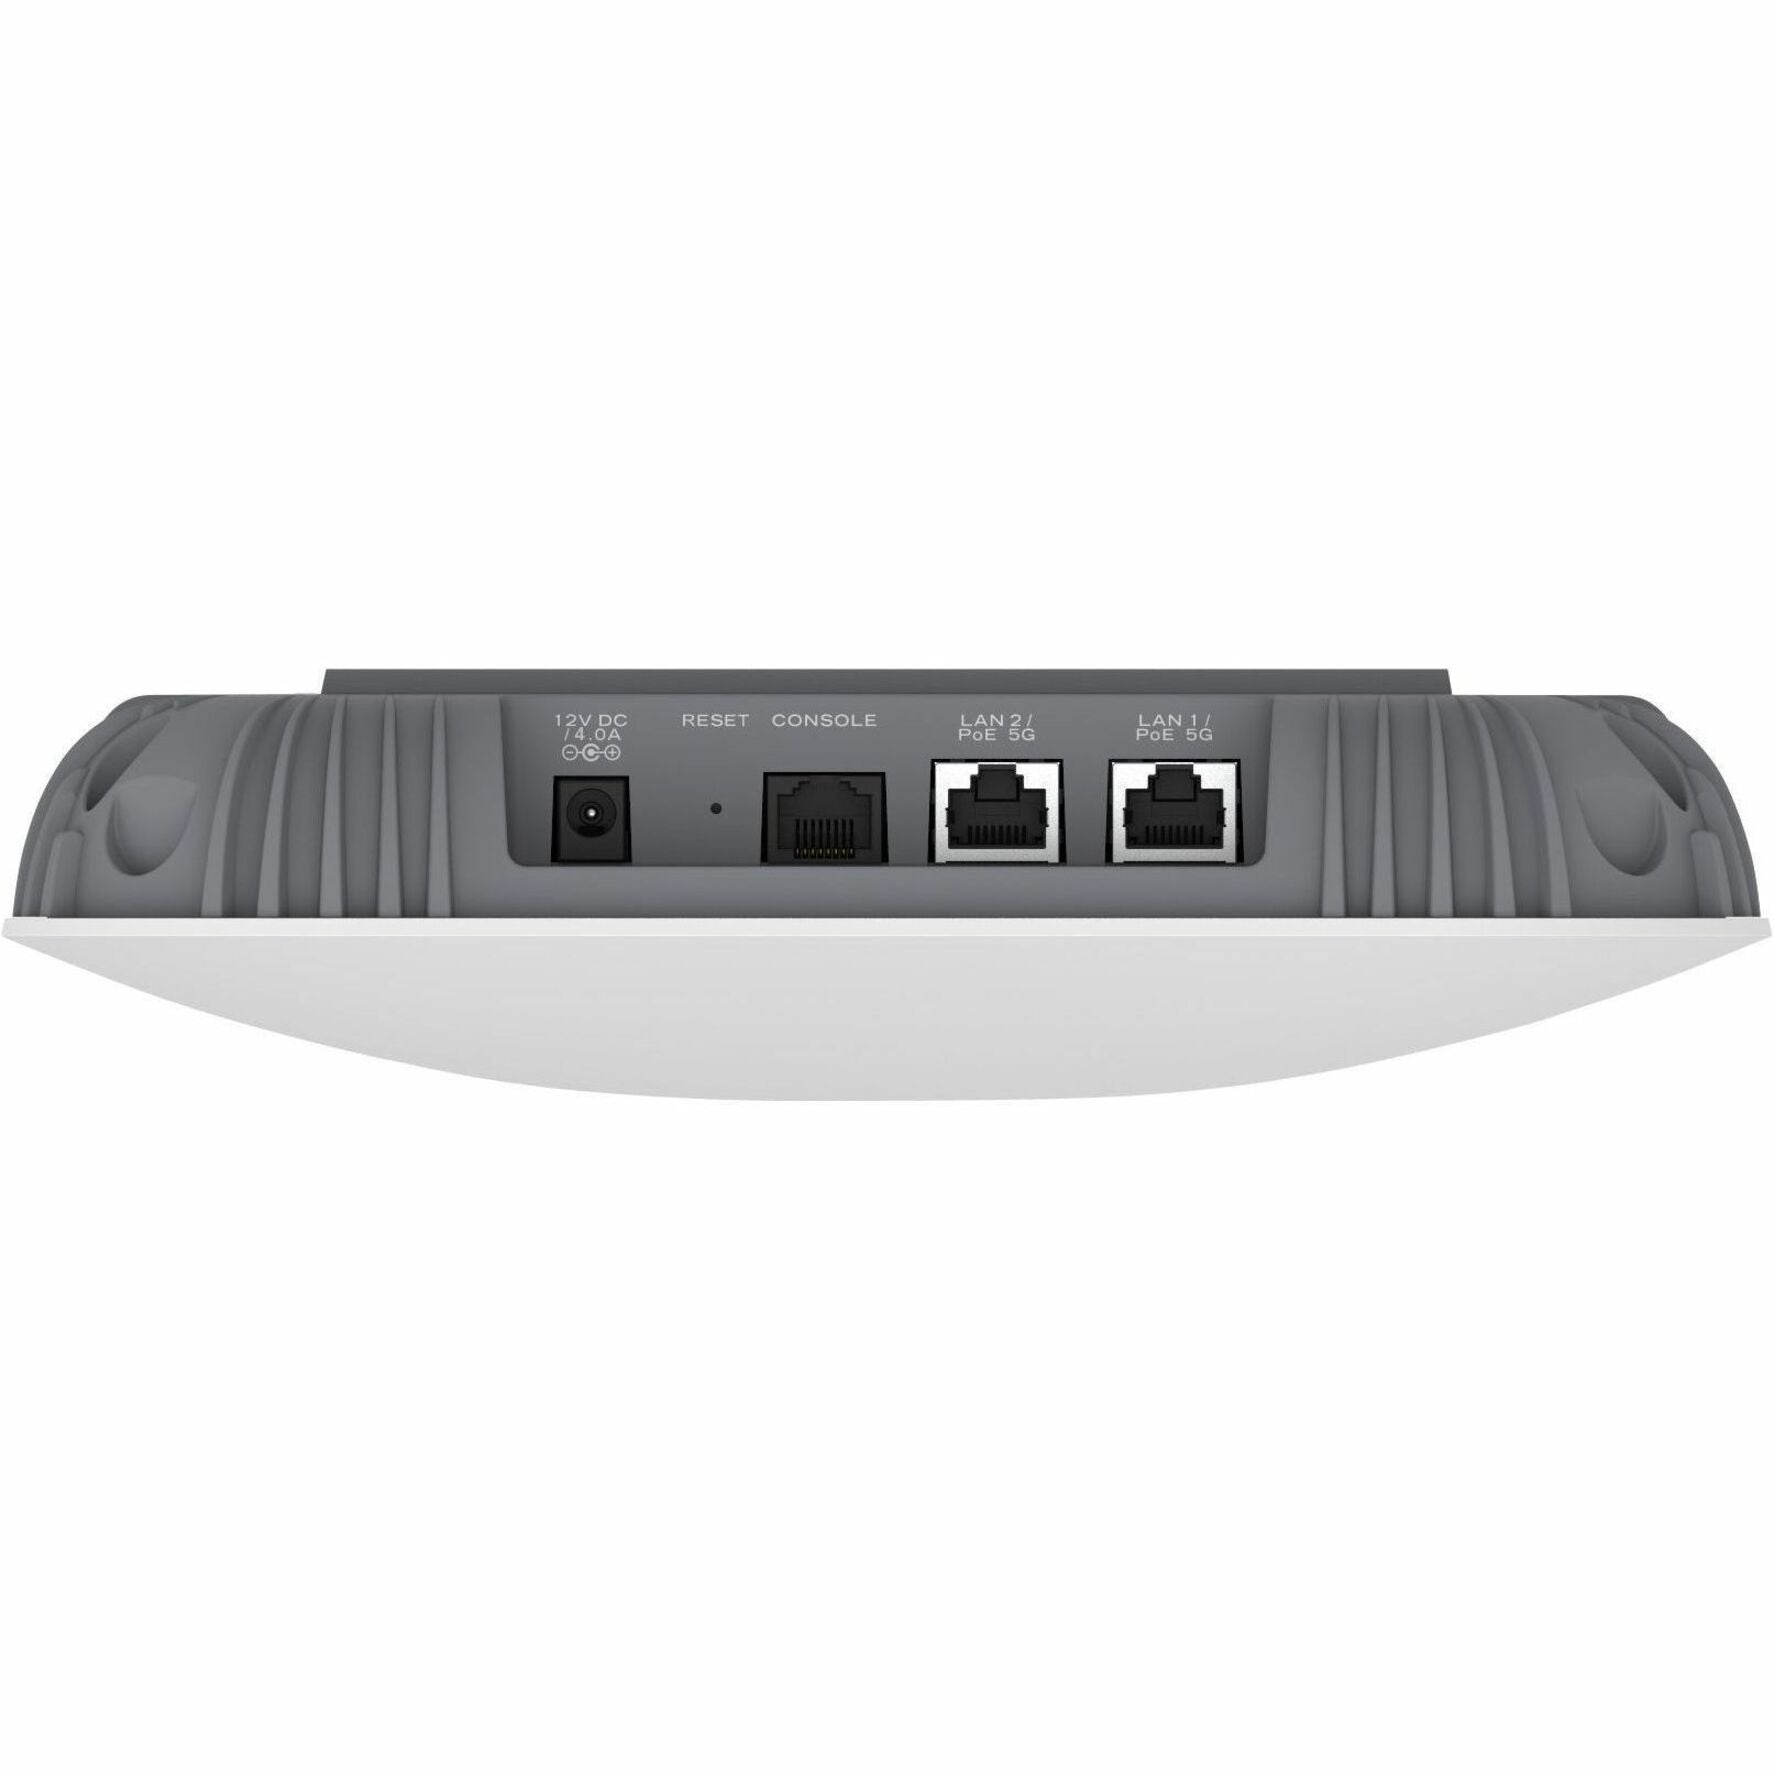 Fortinet FAP-431G-A FortiAP 431G Wireless Access Point, Tri Band, 8.16 Gbit/s